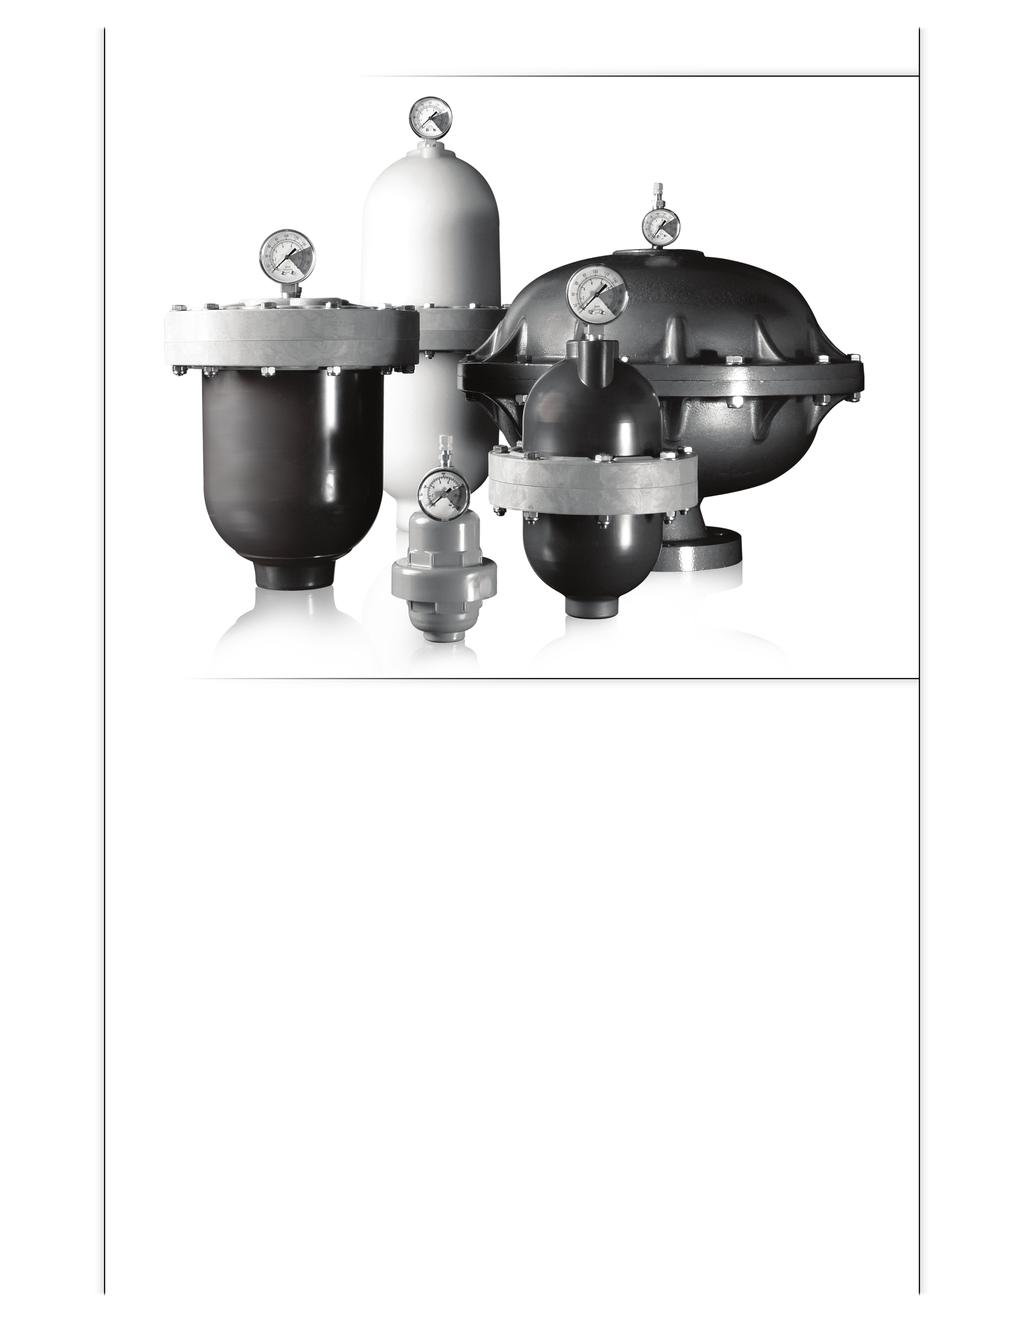 INSTALLATION & OPERATION MANUAL INLET STABILIZER DAMPENER ( J MODEL) SENTRY dampeners are pressure vessels containing a flexible bladder or bellows inside that separates an inert pressurized gas (air